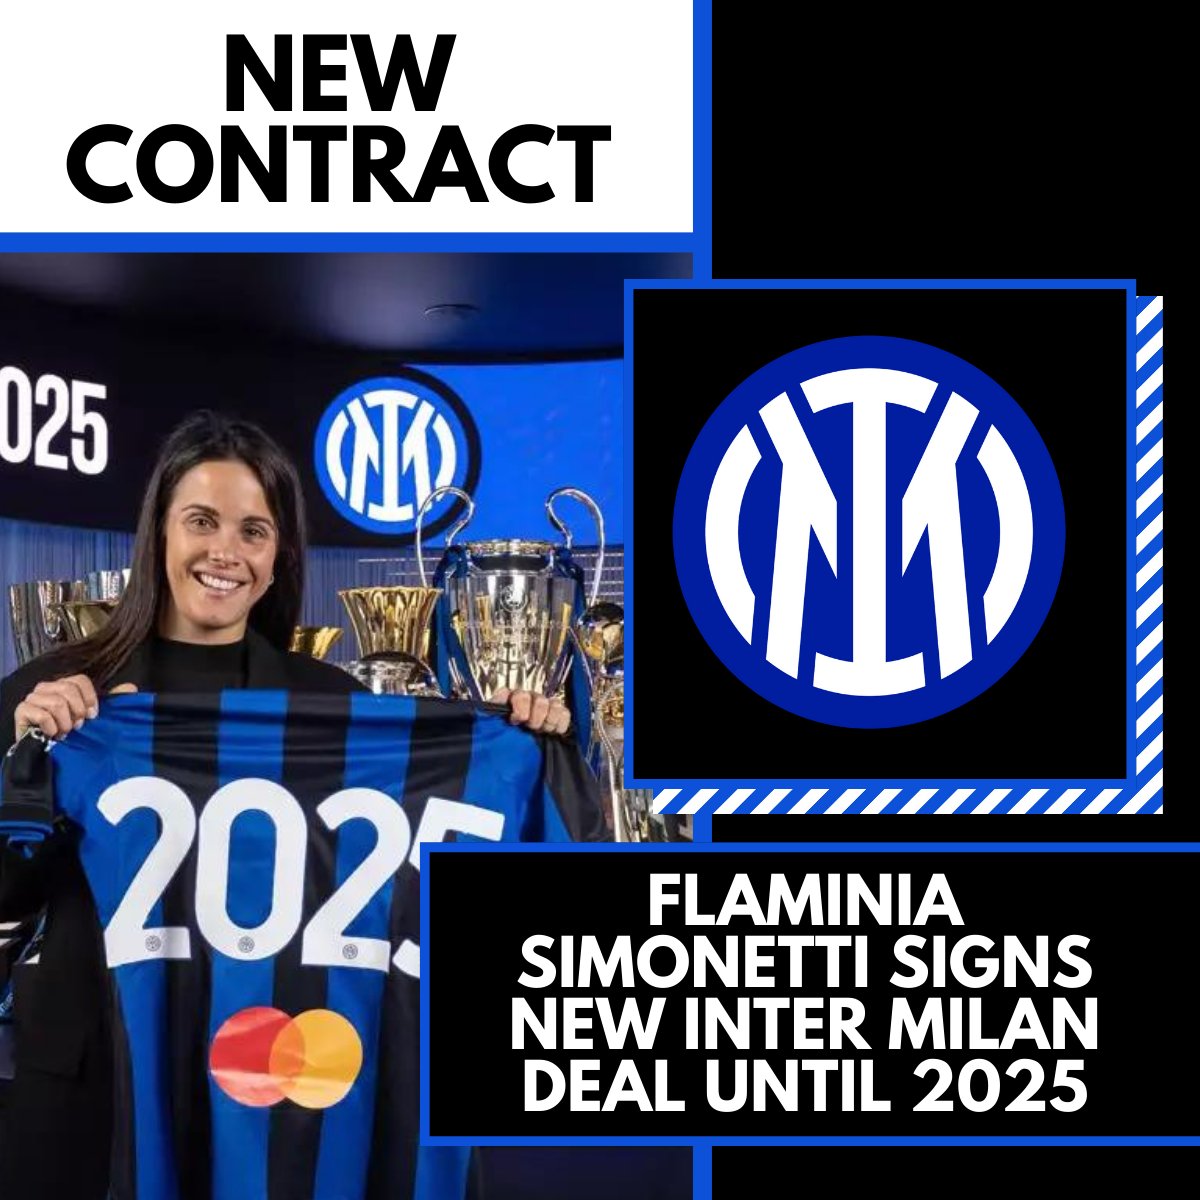 Inter Milan have announced that Flaminia Simonetti has signed a new deal to remain at the club until 2025. 

#ForzaInter #InterWomen #Simonetti2025